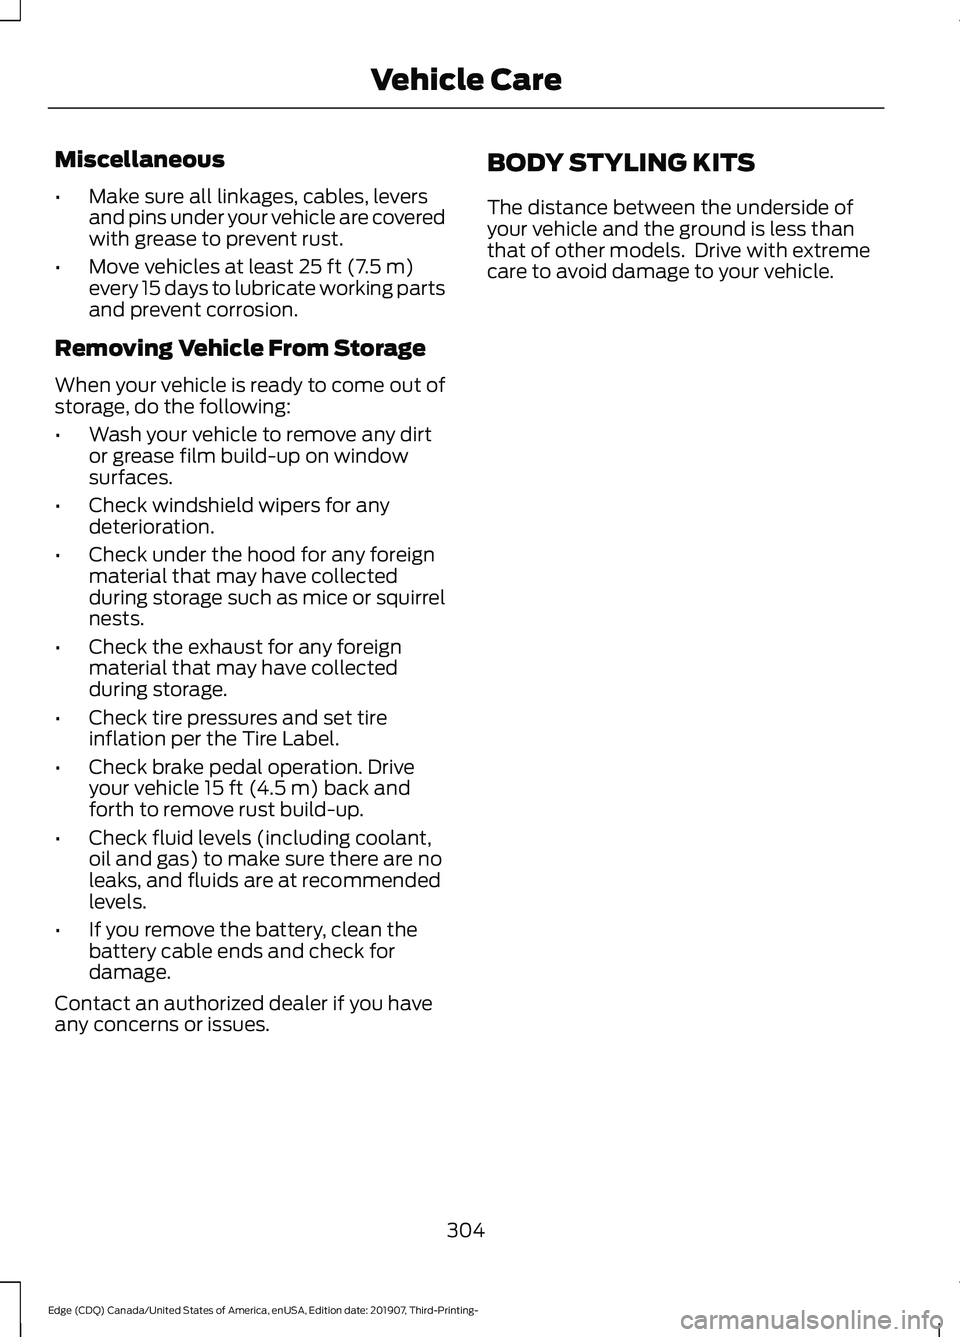 FORD EDGE 2020 Service Manual Miscellaneous
•
Make sure all linkages, cables, levers
and pins under your vehicle are covered
with grease to prevent rust.
• Move vehicles at least 25 ft (7.5 m)
every 15 days to lubricate workin